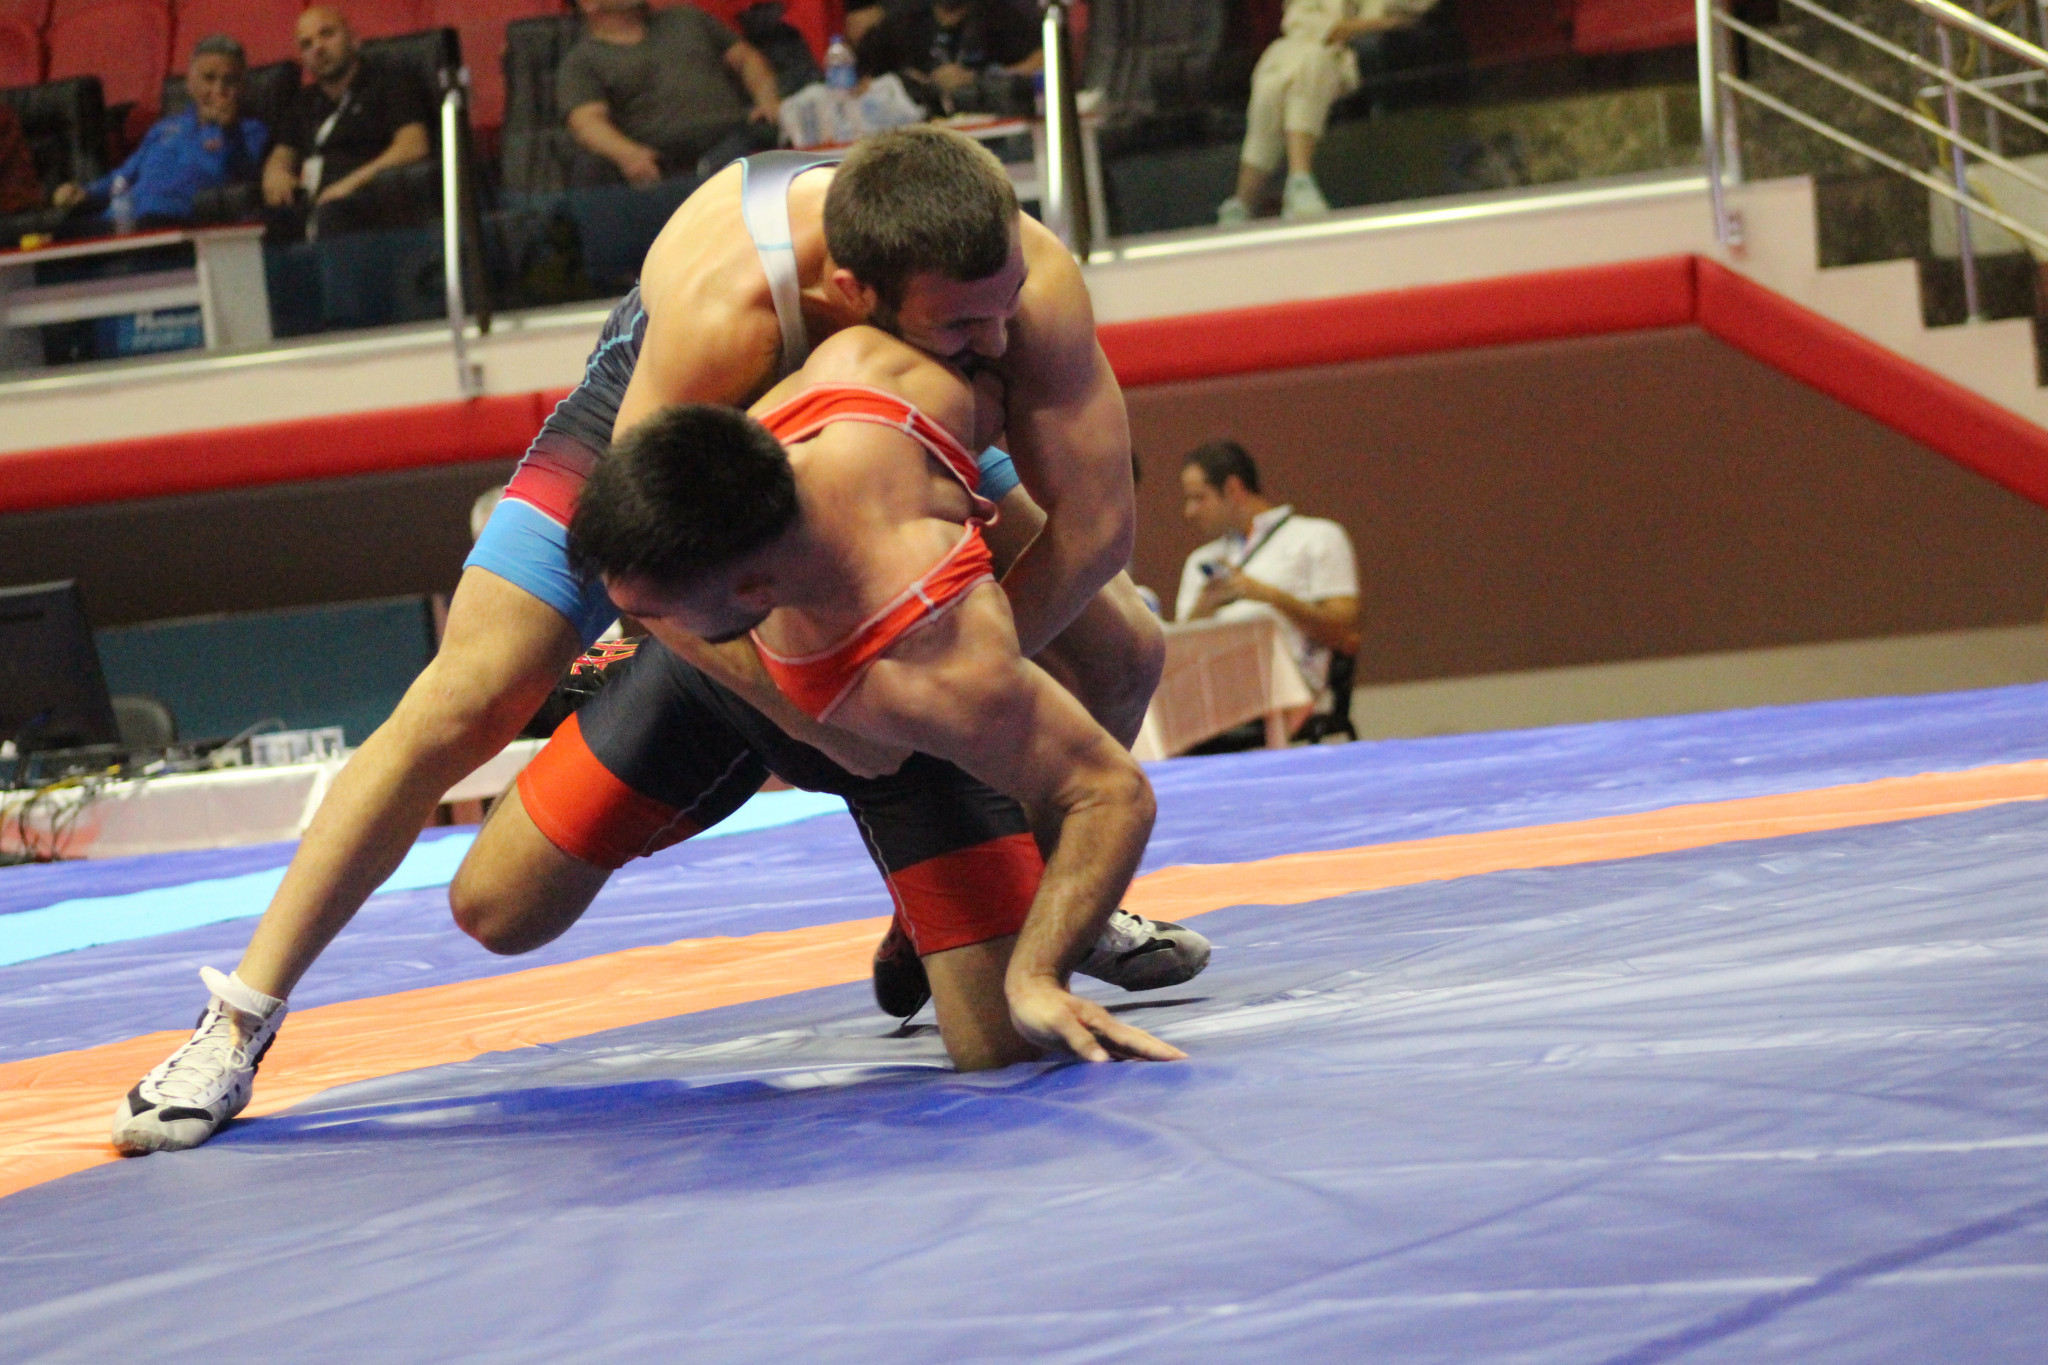 A wrestler attempted to ground his opponent, which leads to a score of two points ©FISU